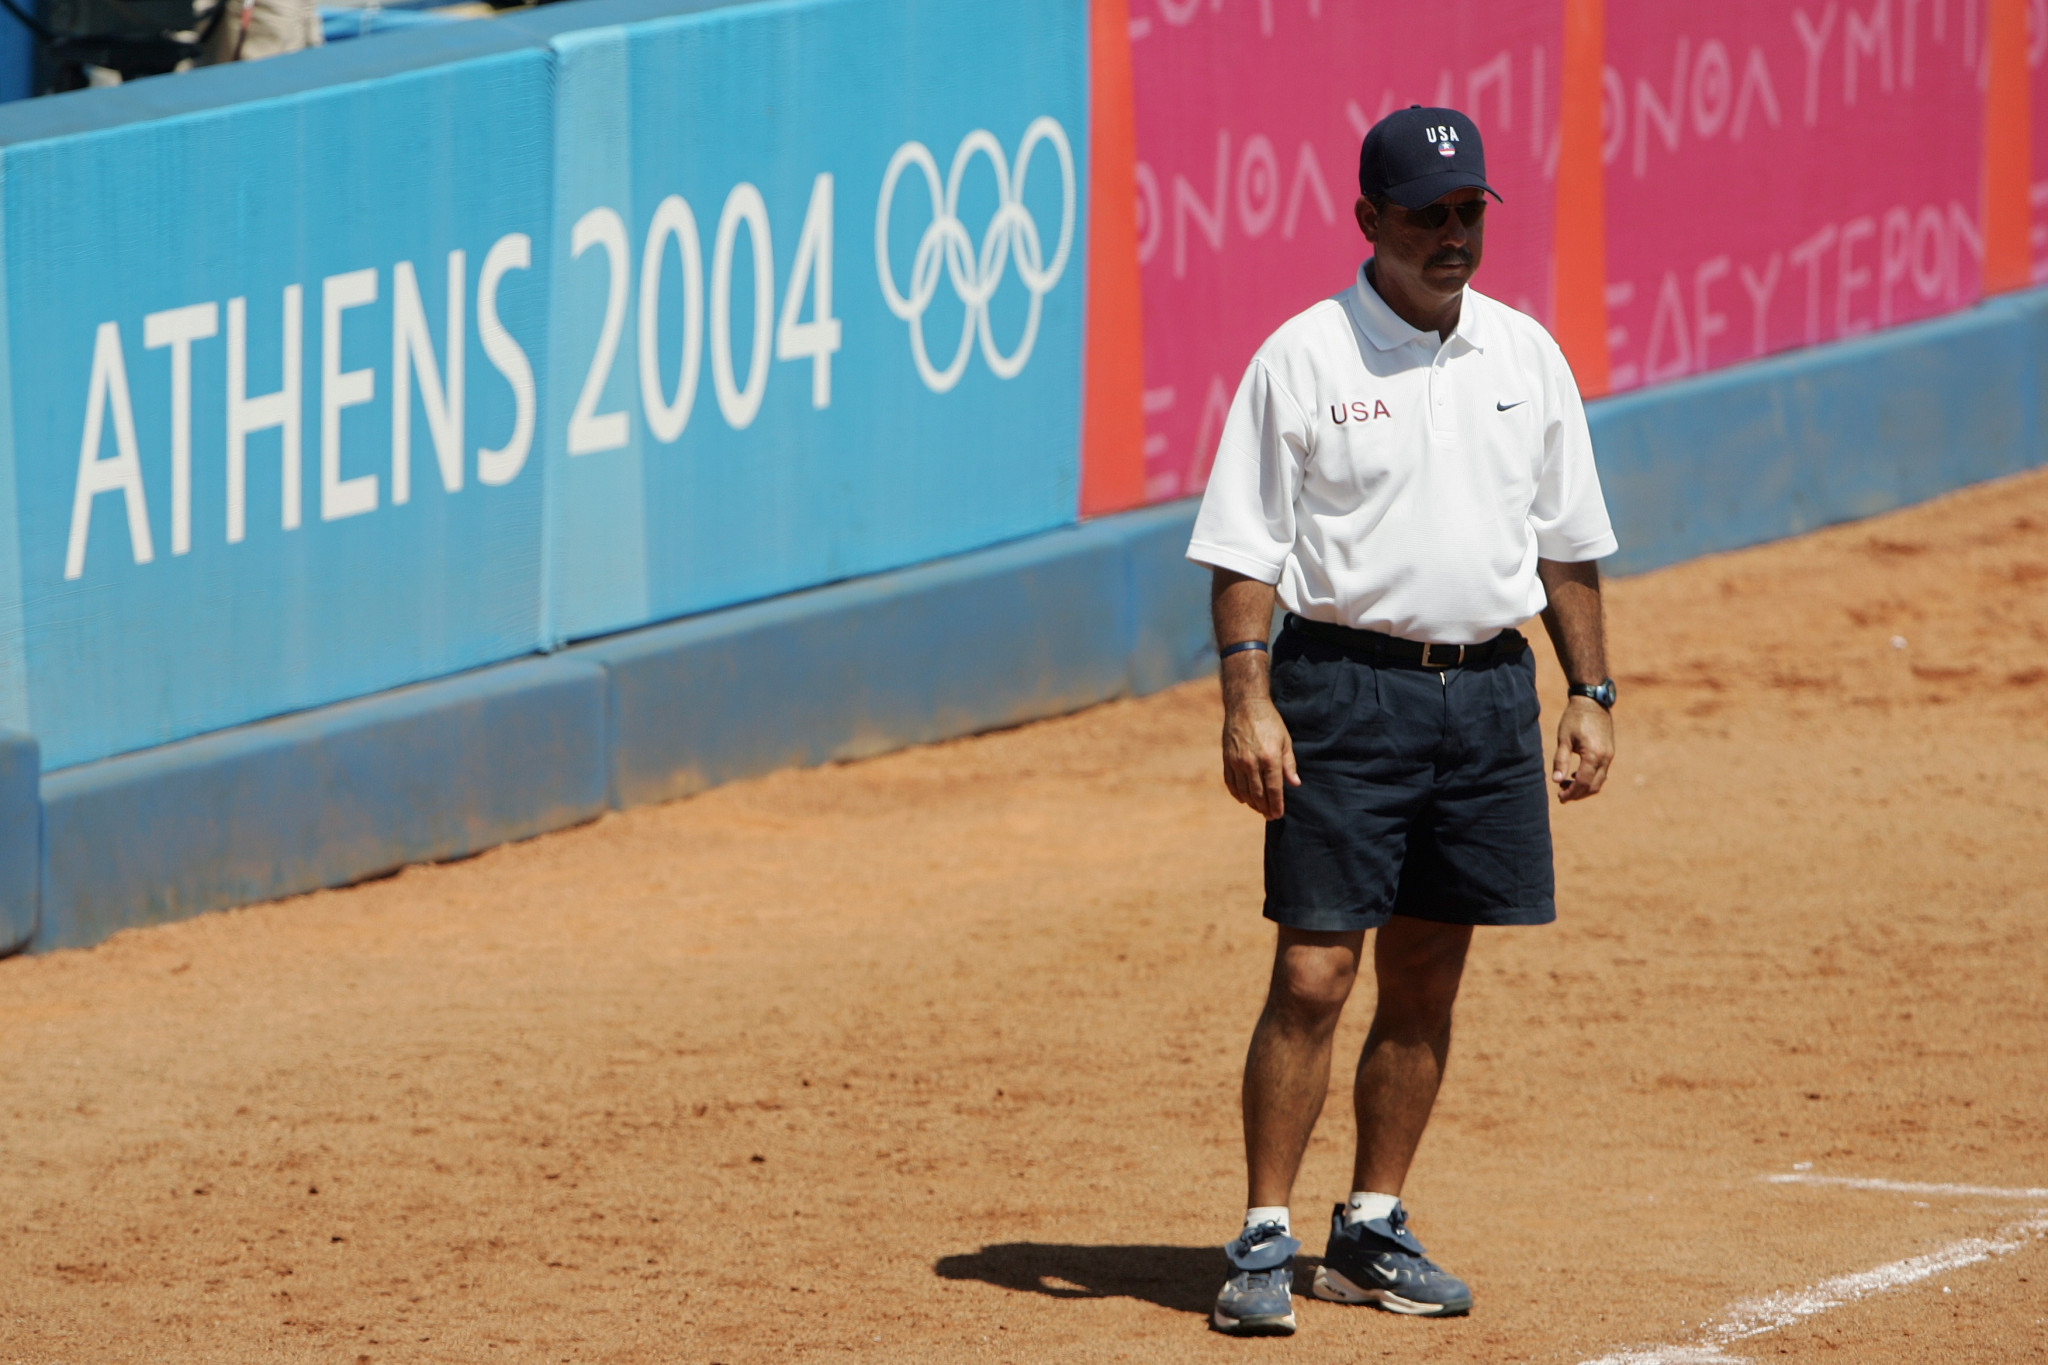 Mike Candrea, who guided the United States to Olympic the women's softball gold medal at Athens 2004, has had a field at the University of Arizona named after him ©Getty Images